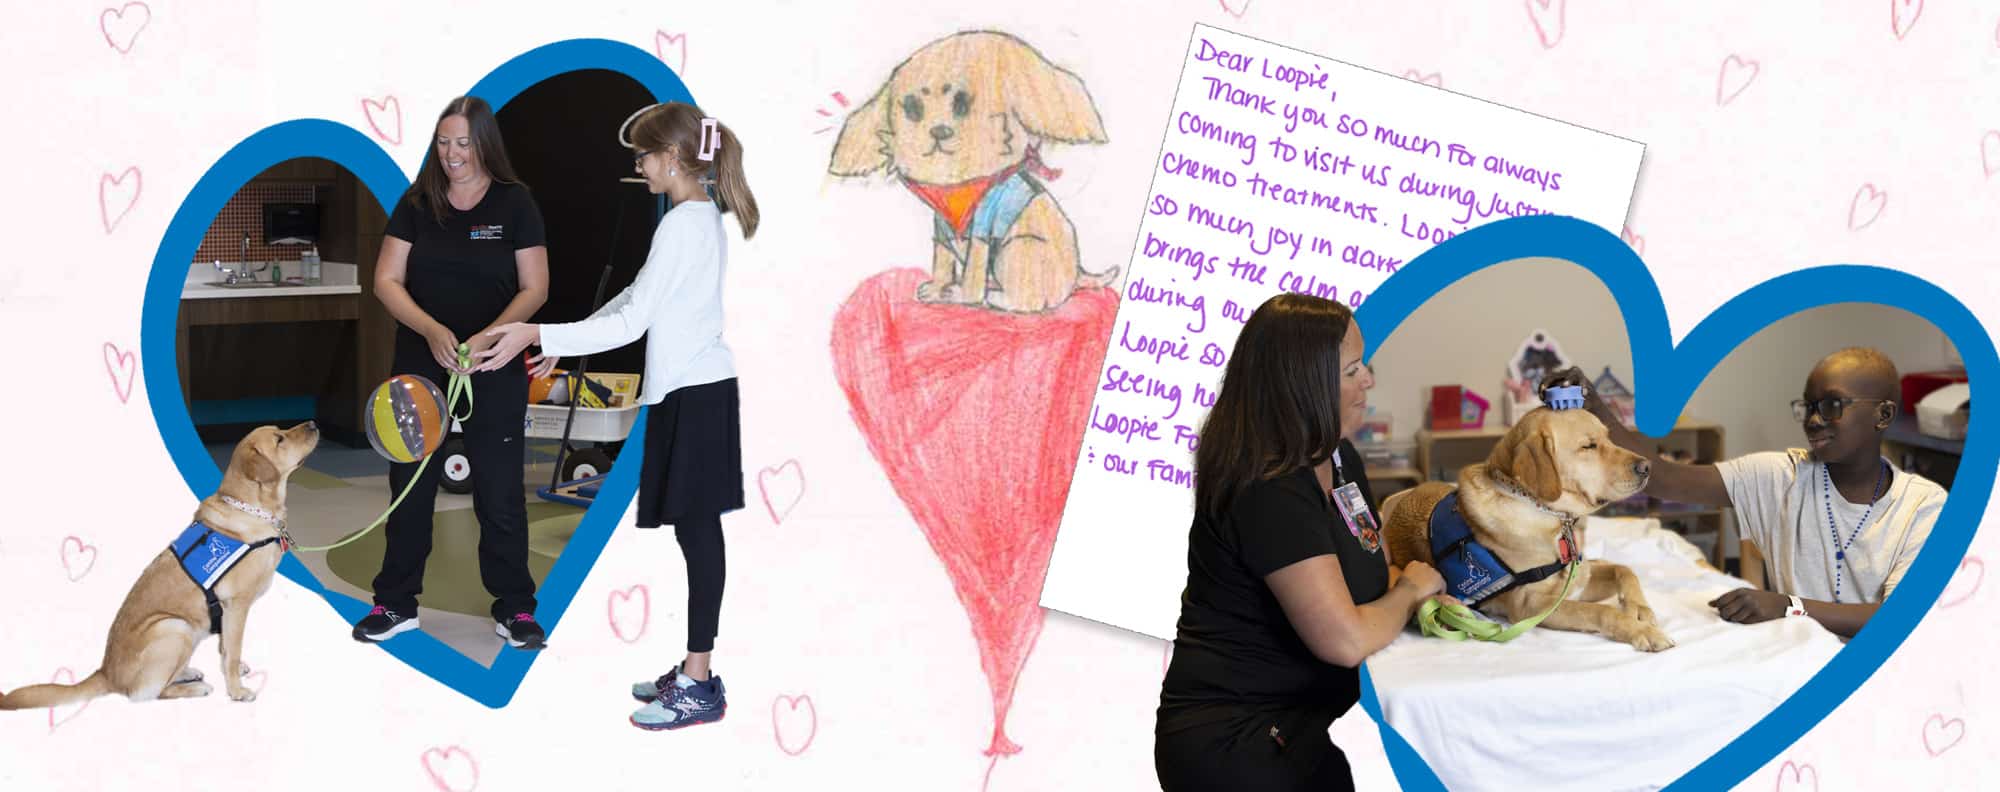 Two service dog teams working in childrens hospitals surrounded by a heart outline. There is an image of a handwritten letter with a hand drawn dog with a heart